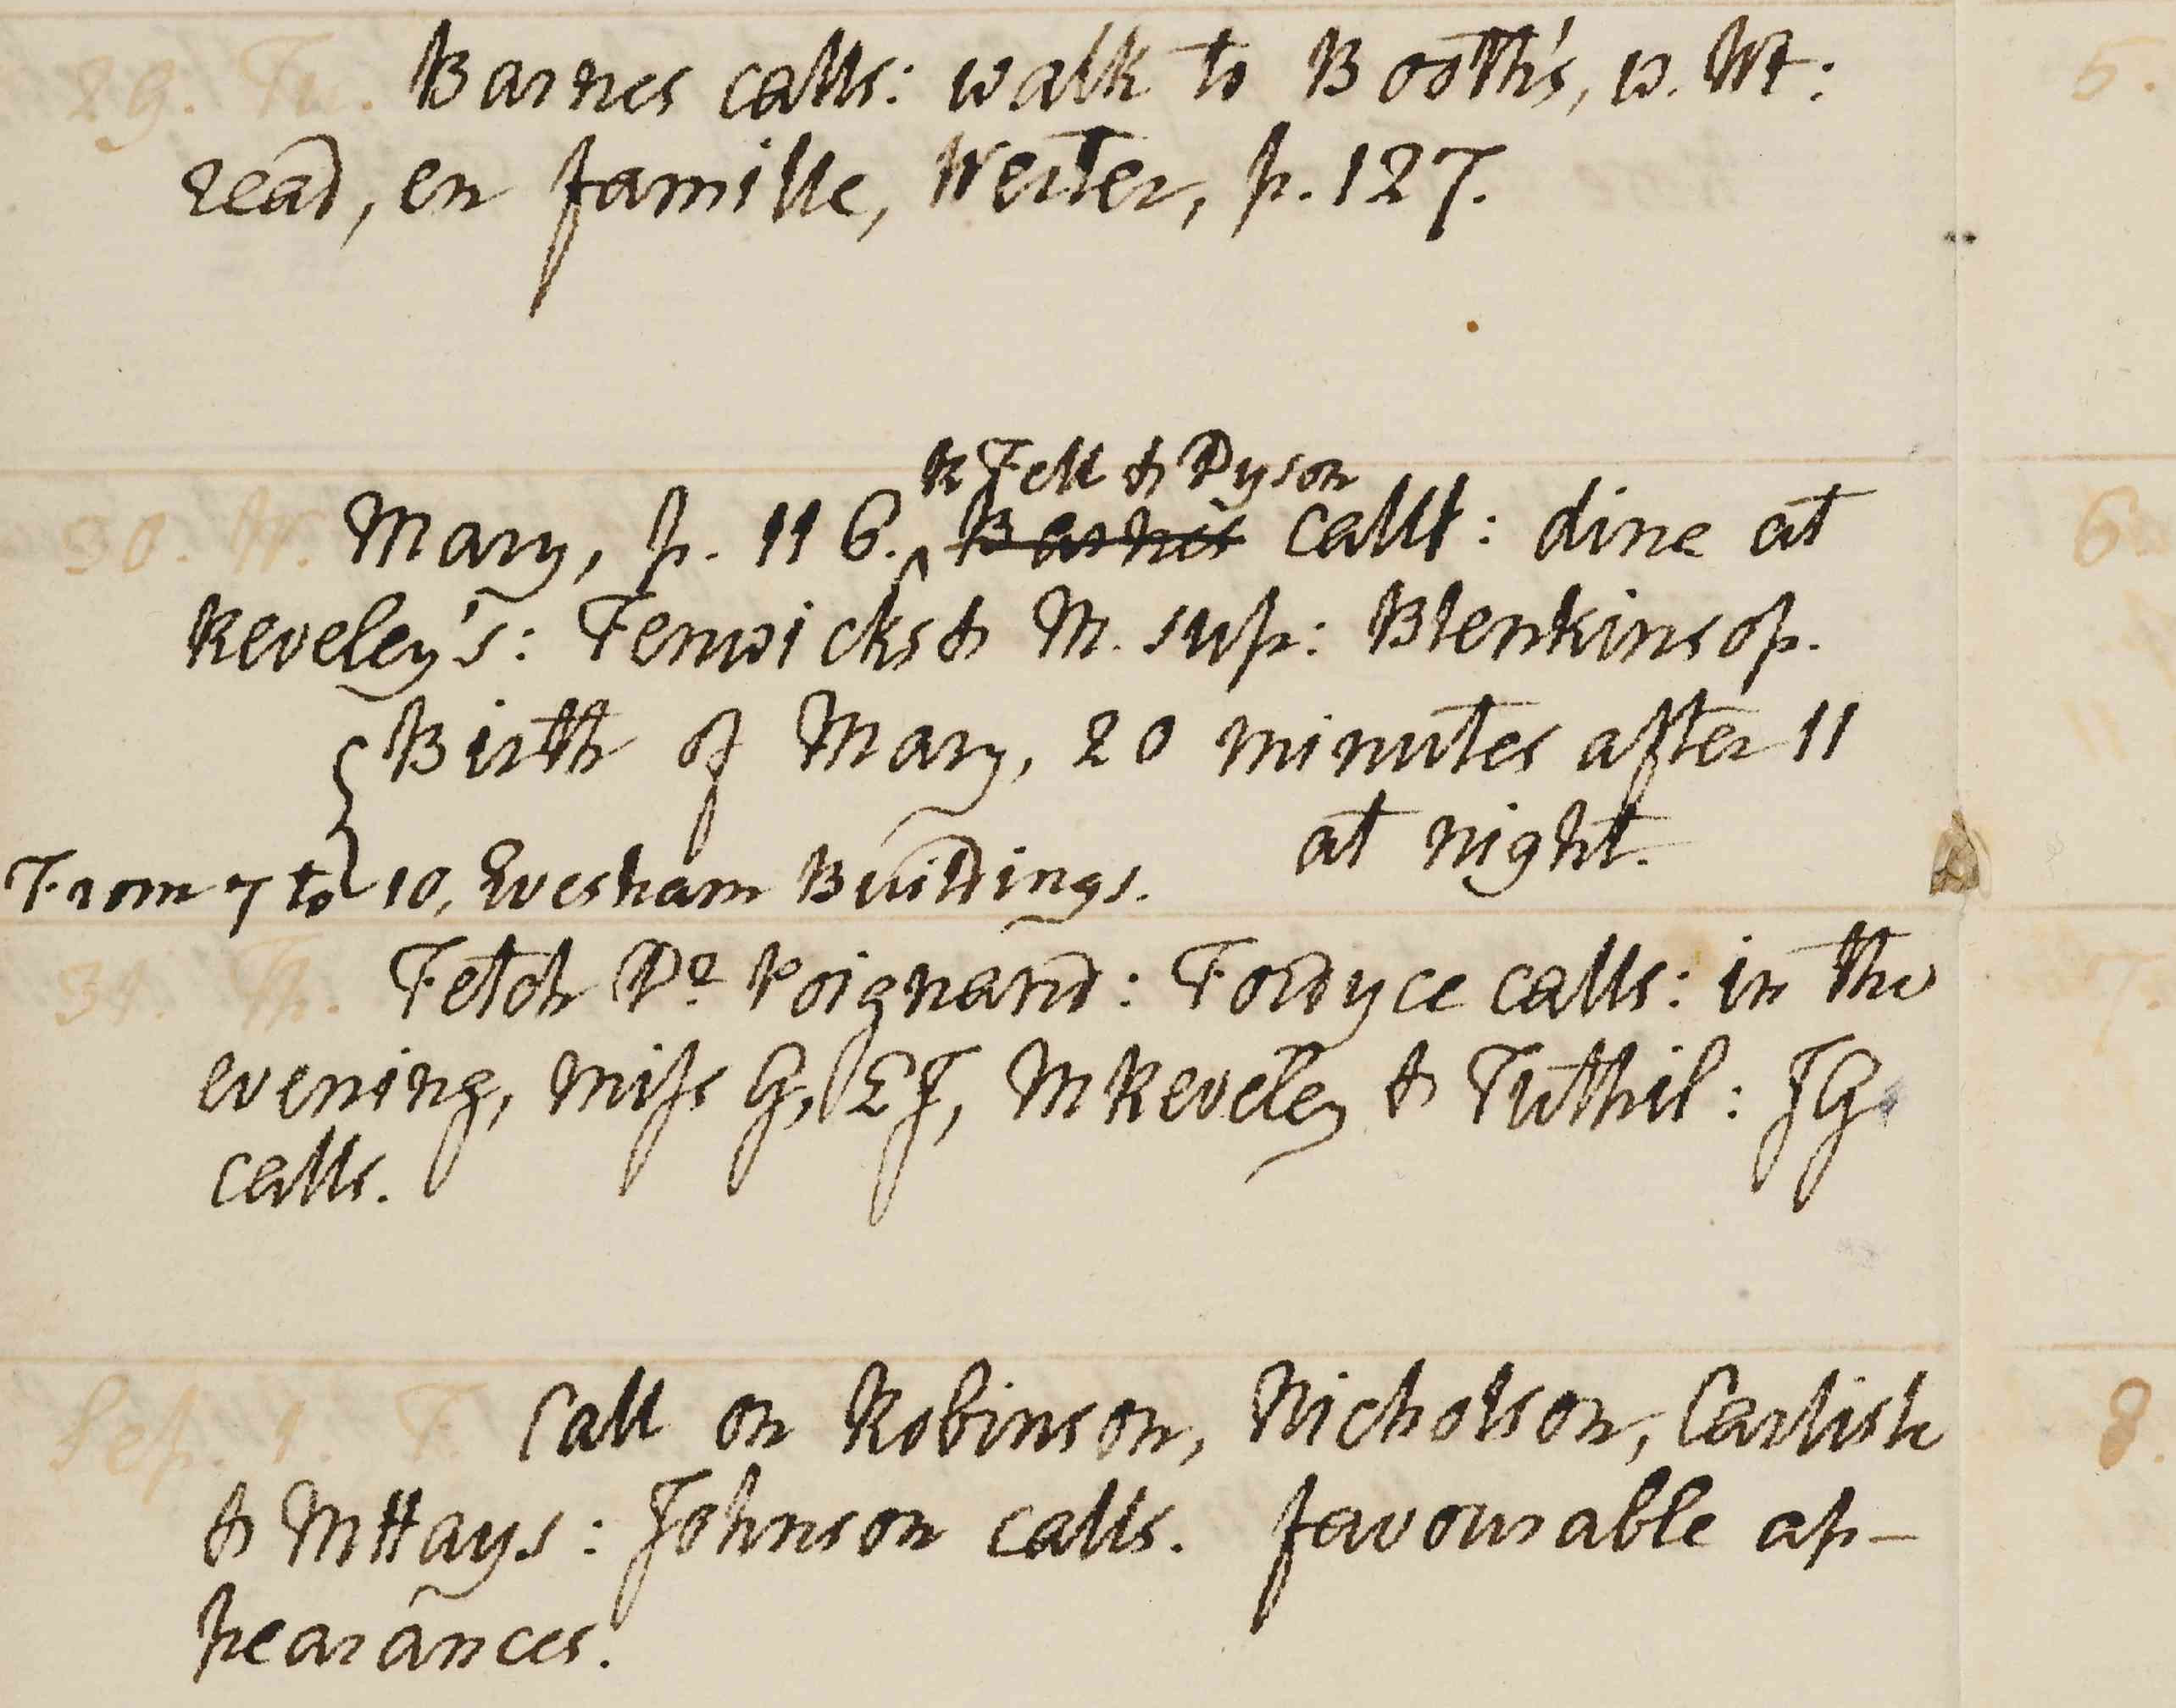 Image of a manuscript page from the eighteenth century. The page
						includes life events like births.